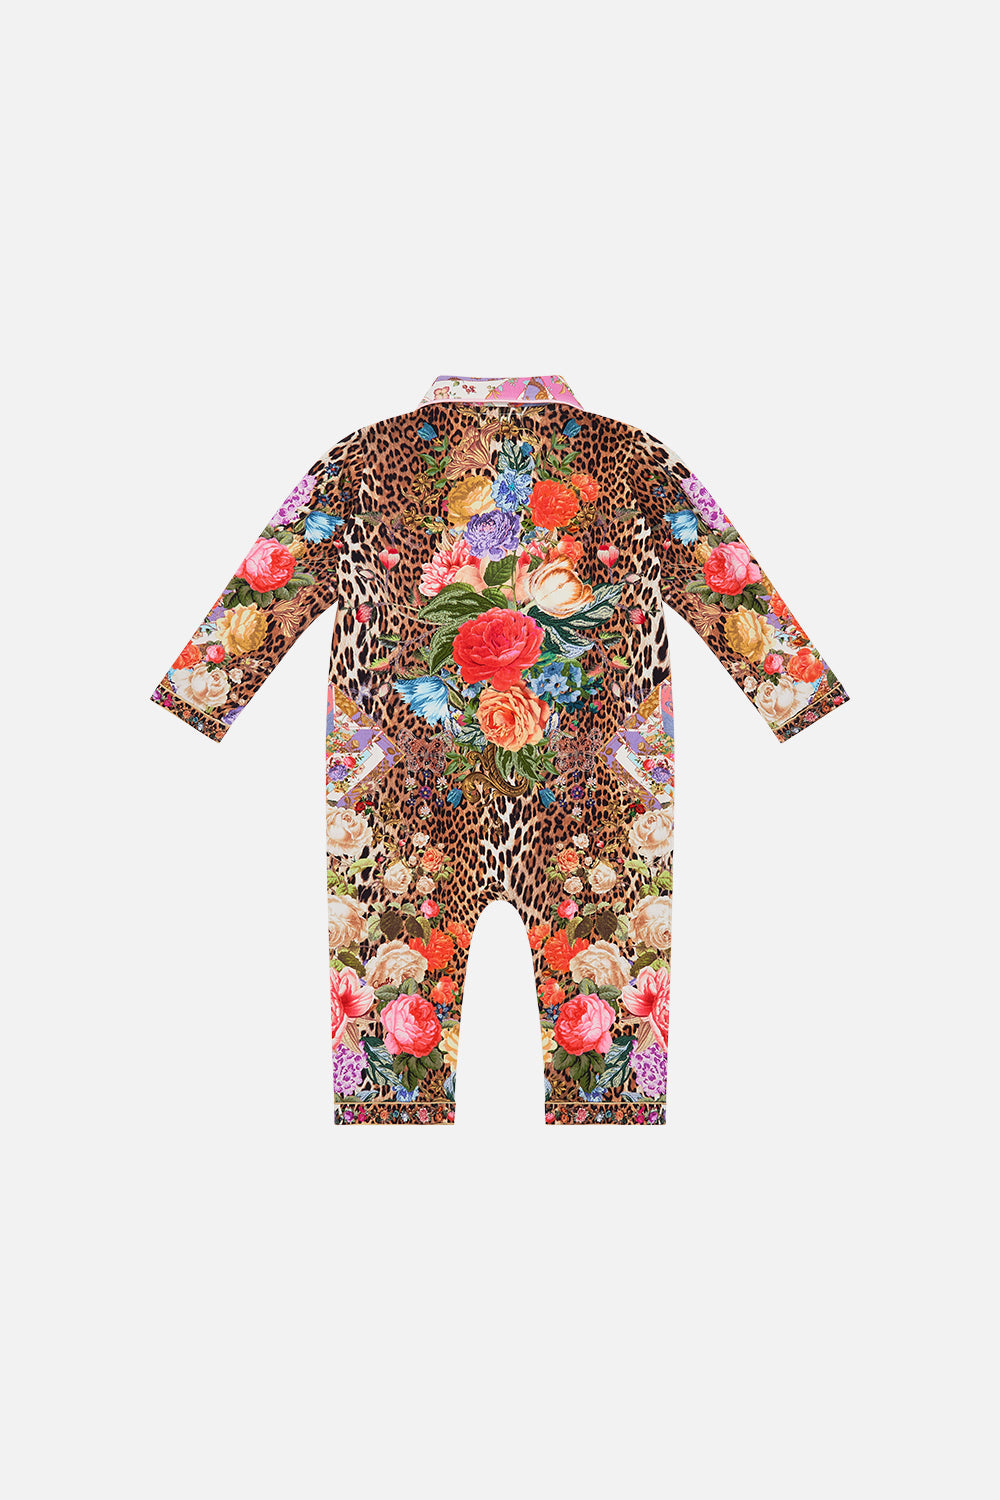 Milla by CAMILLA floral babies romper with collar in Heirloom Anthem